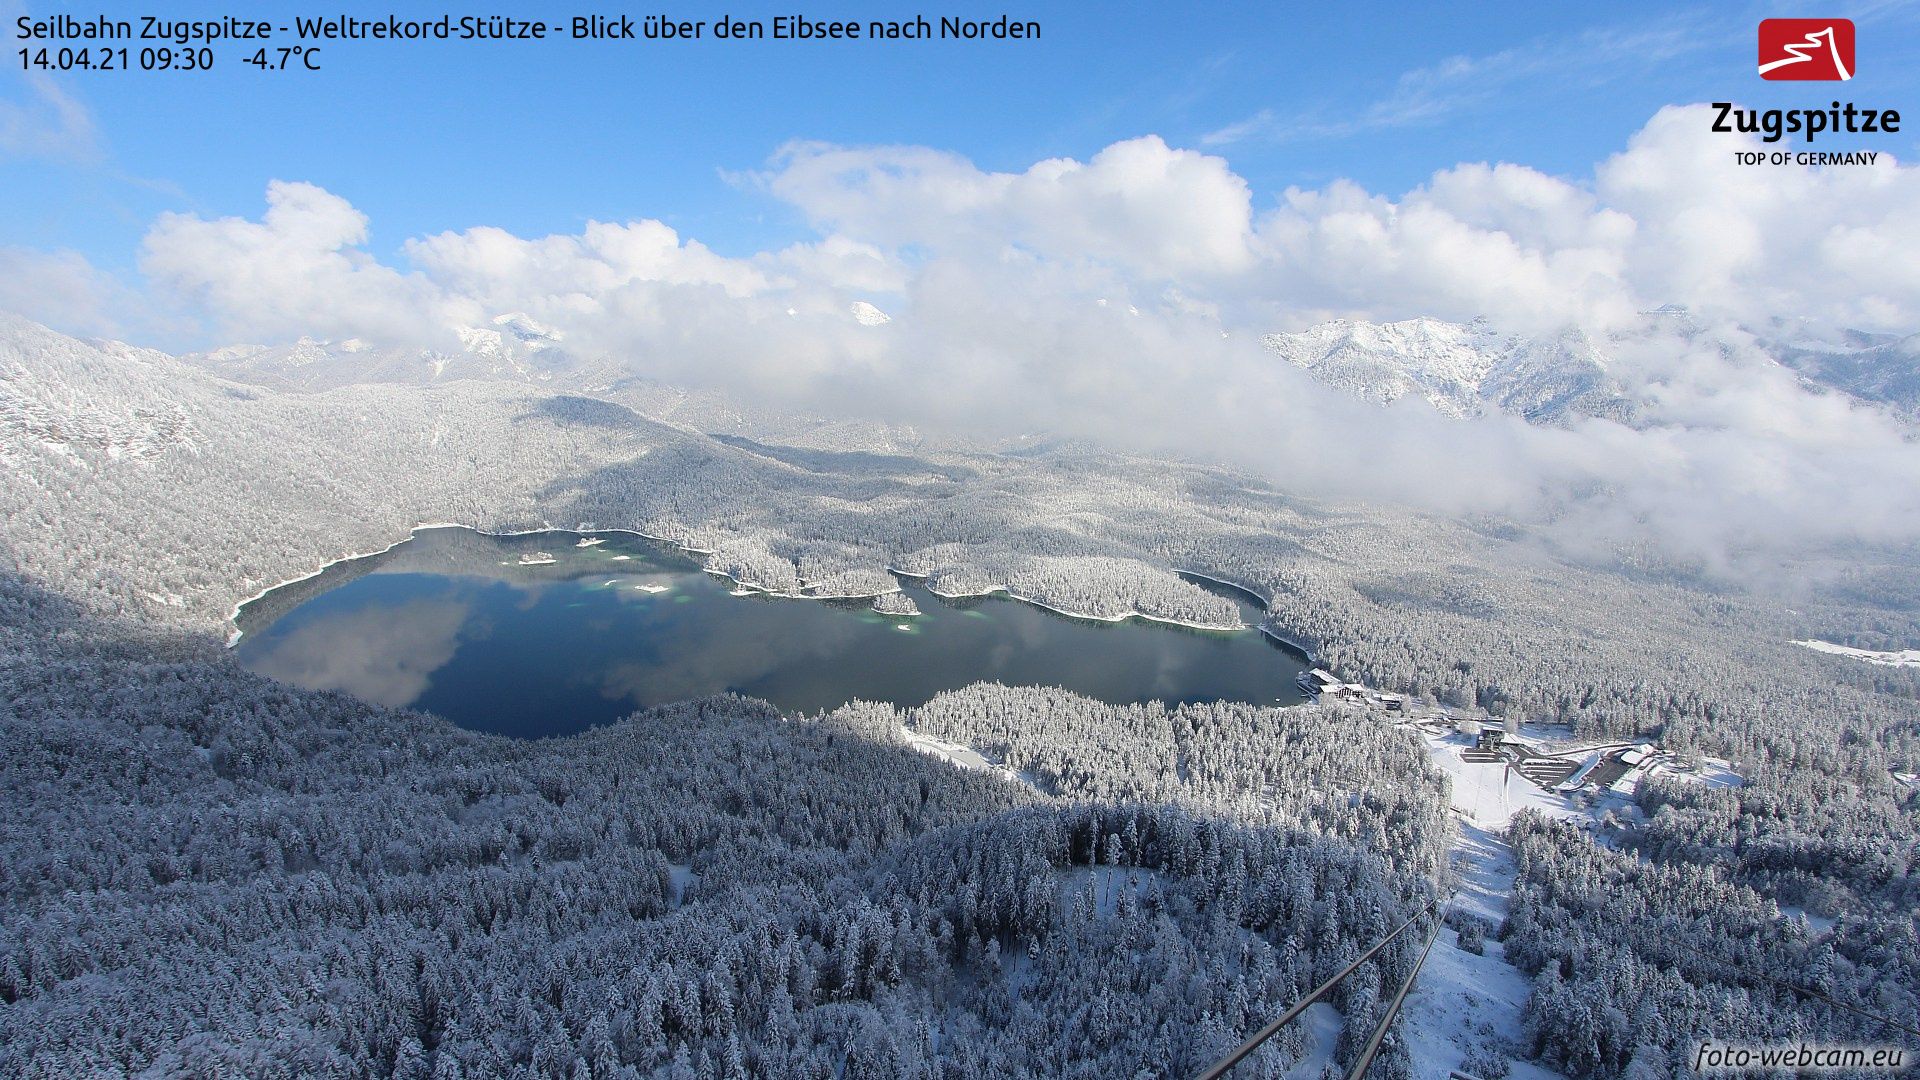 Further east, some residual clouds can be found, such as here at the Eibsee in Garmisch (foto-webcam.eu)